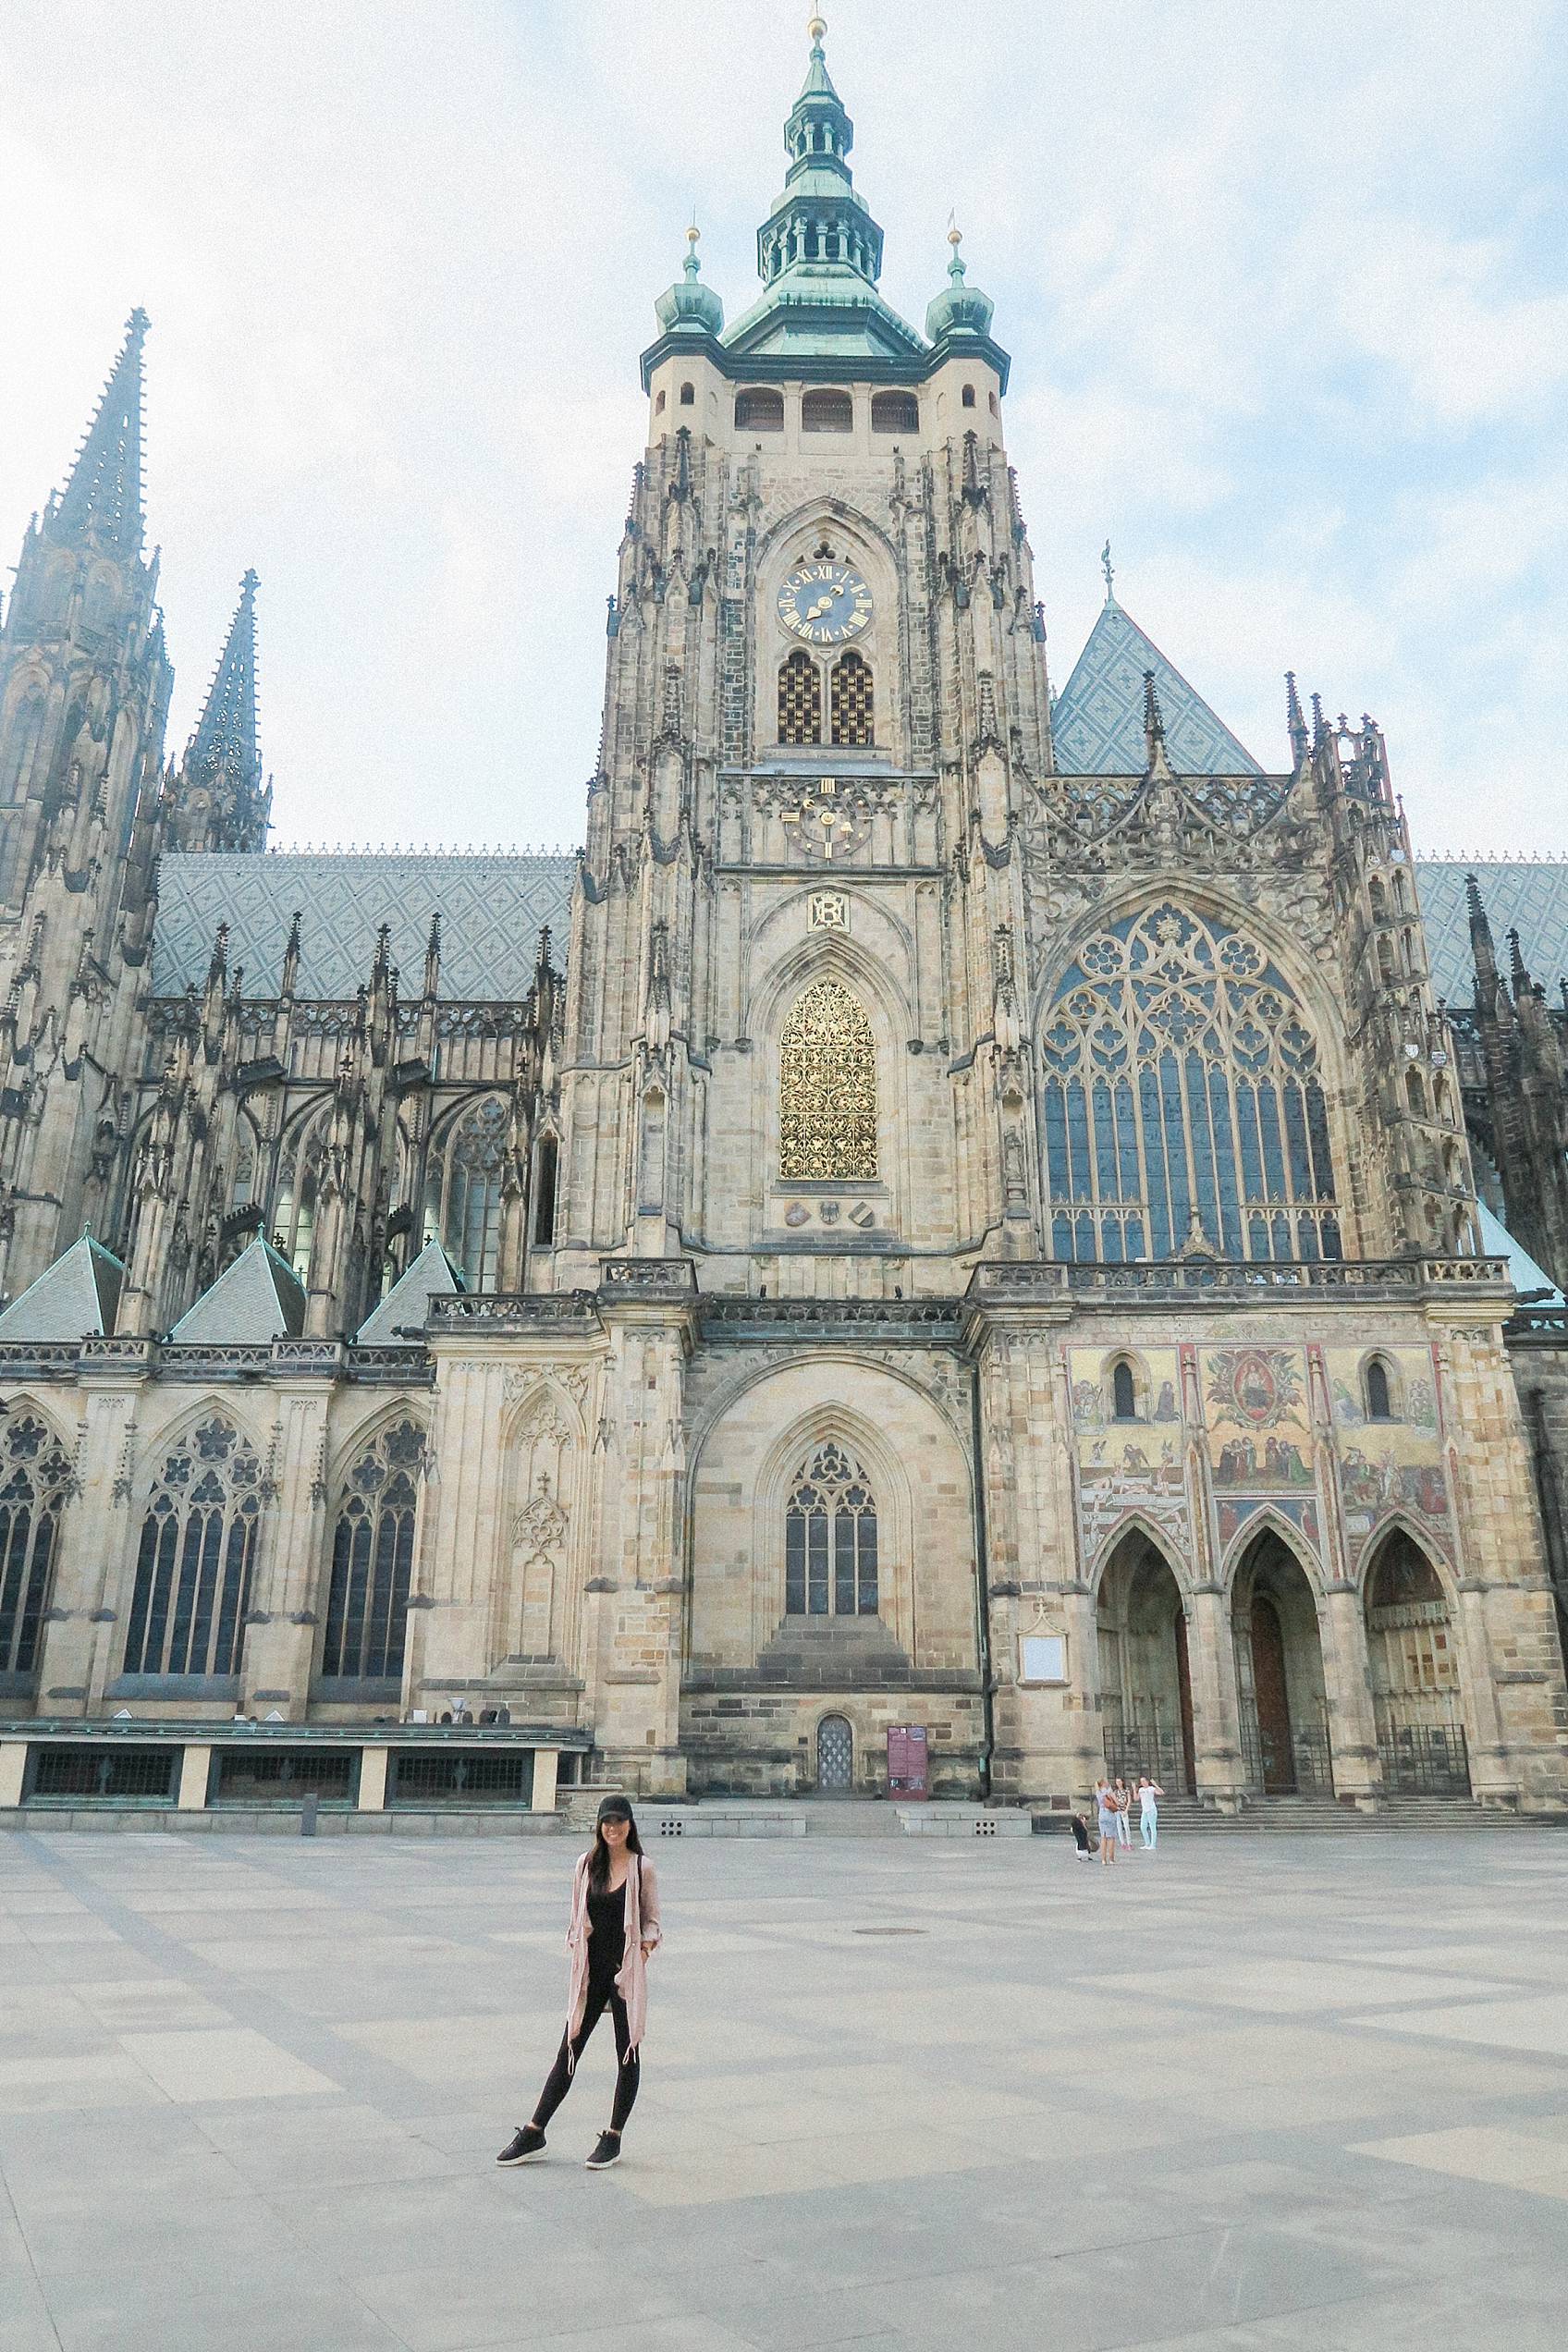 Photo guide to Prague: St. Vitus Cathedral